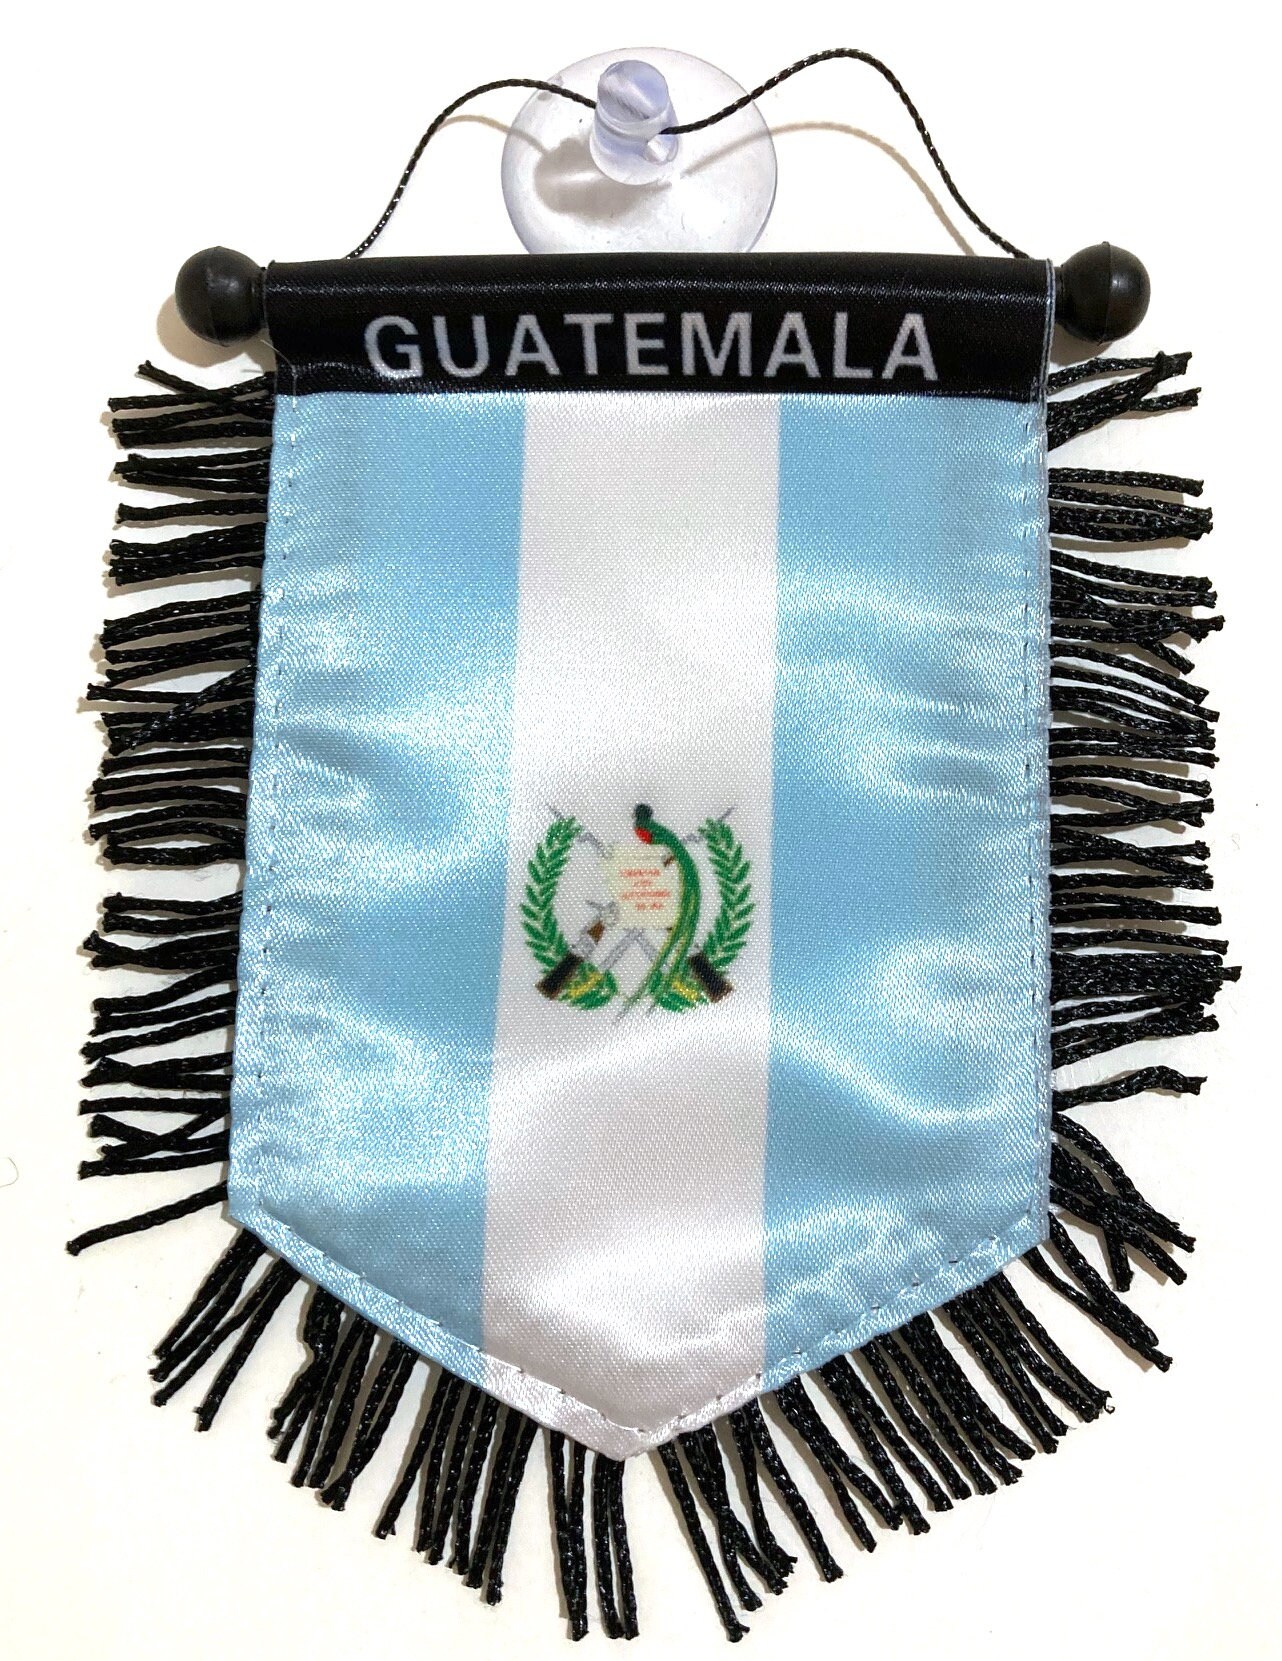 UNITY FLAGZ Guatemala Guatemalan South American Flag Rear View Mirror Hanging CAR Flags Mini Banners for Inside The CAR 